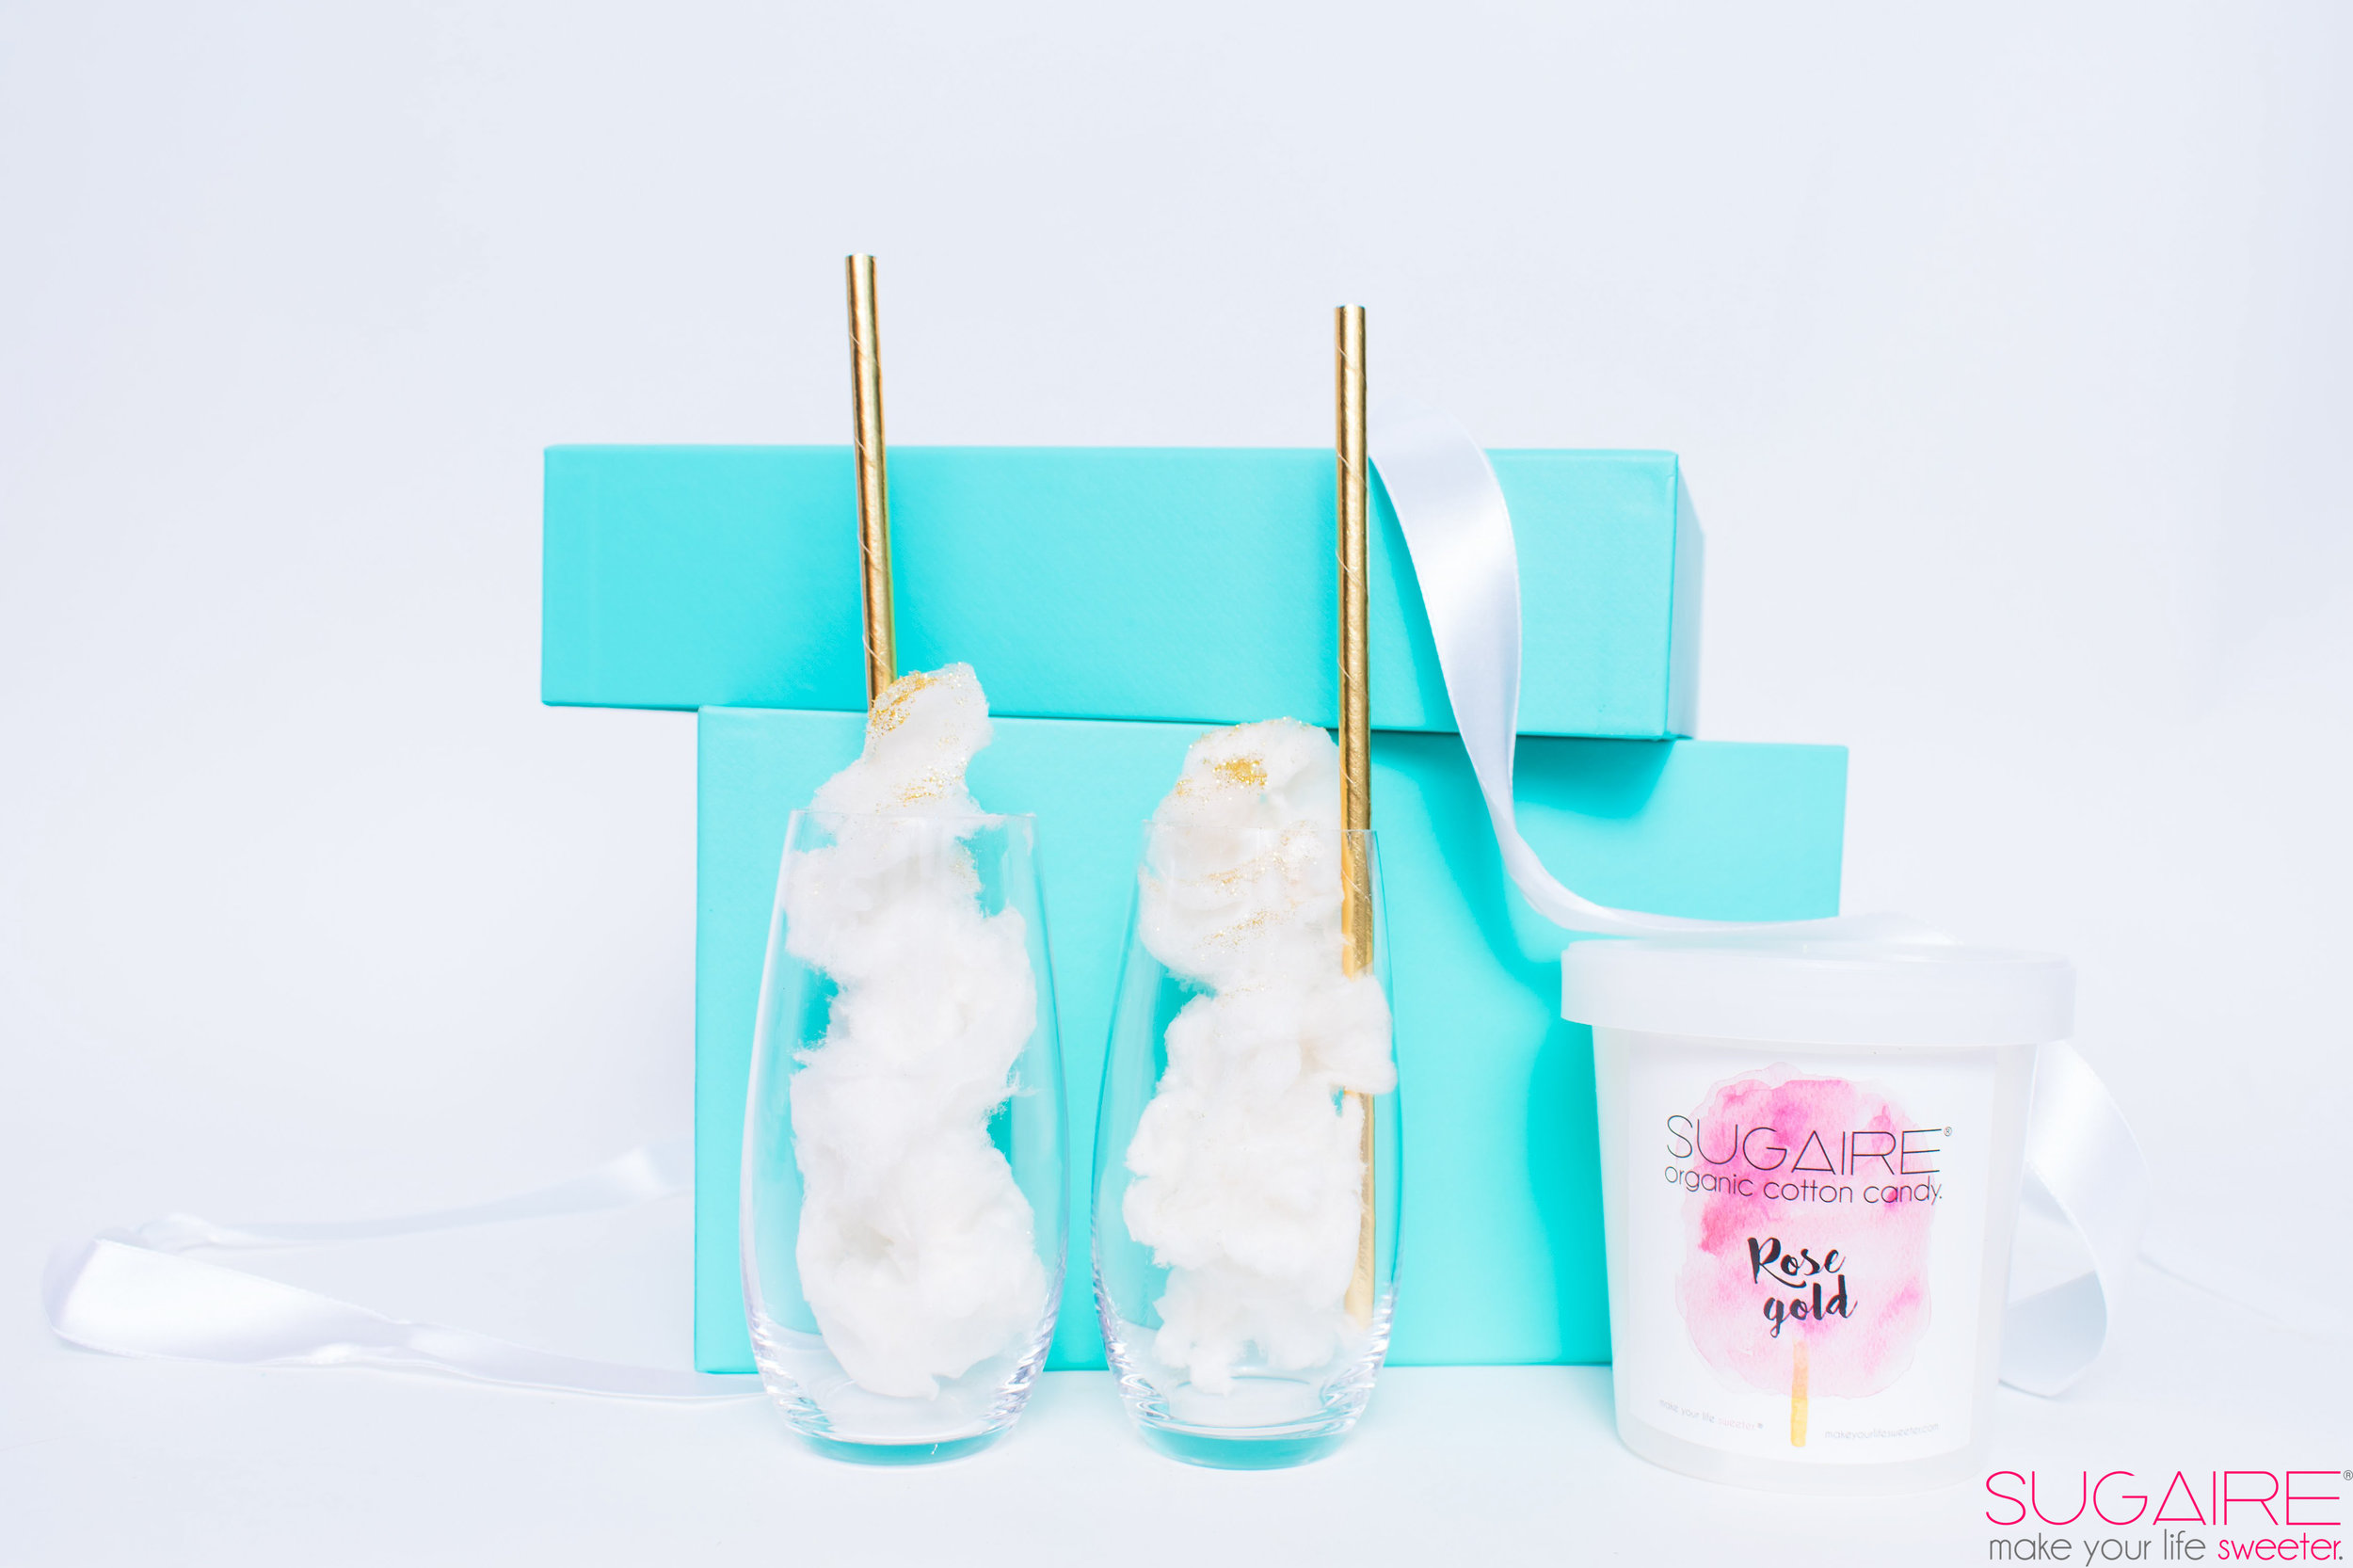 Rose Gold Sugaire sparkling cotton candy infusion gift set